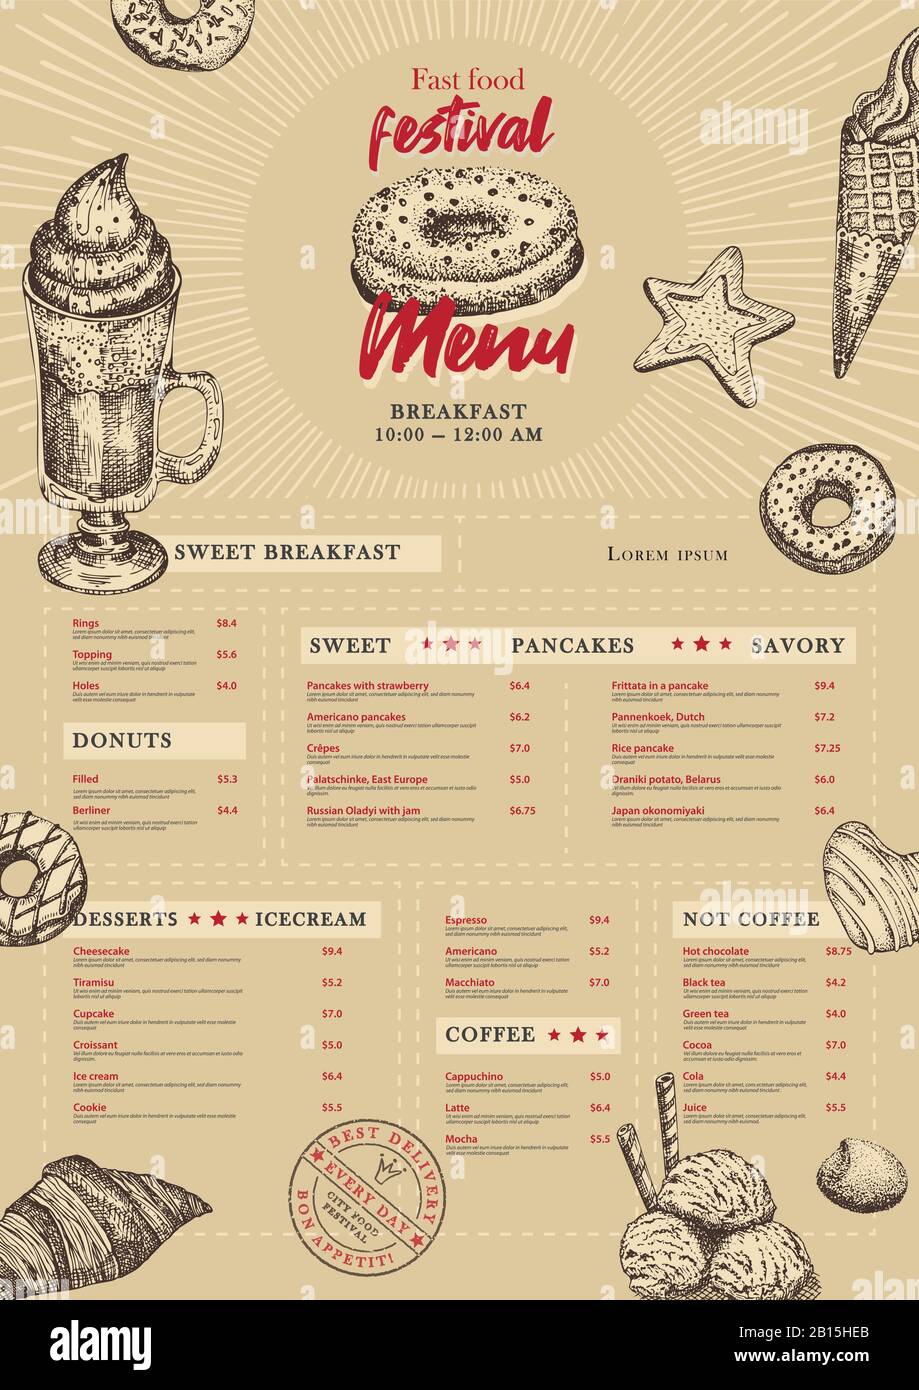 City food festival menu design template in retro style on brown old paper background. Hand drawn sketch sweety elements. Vintage breakfast card Stock Vector